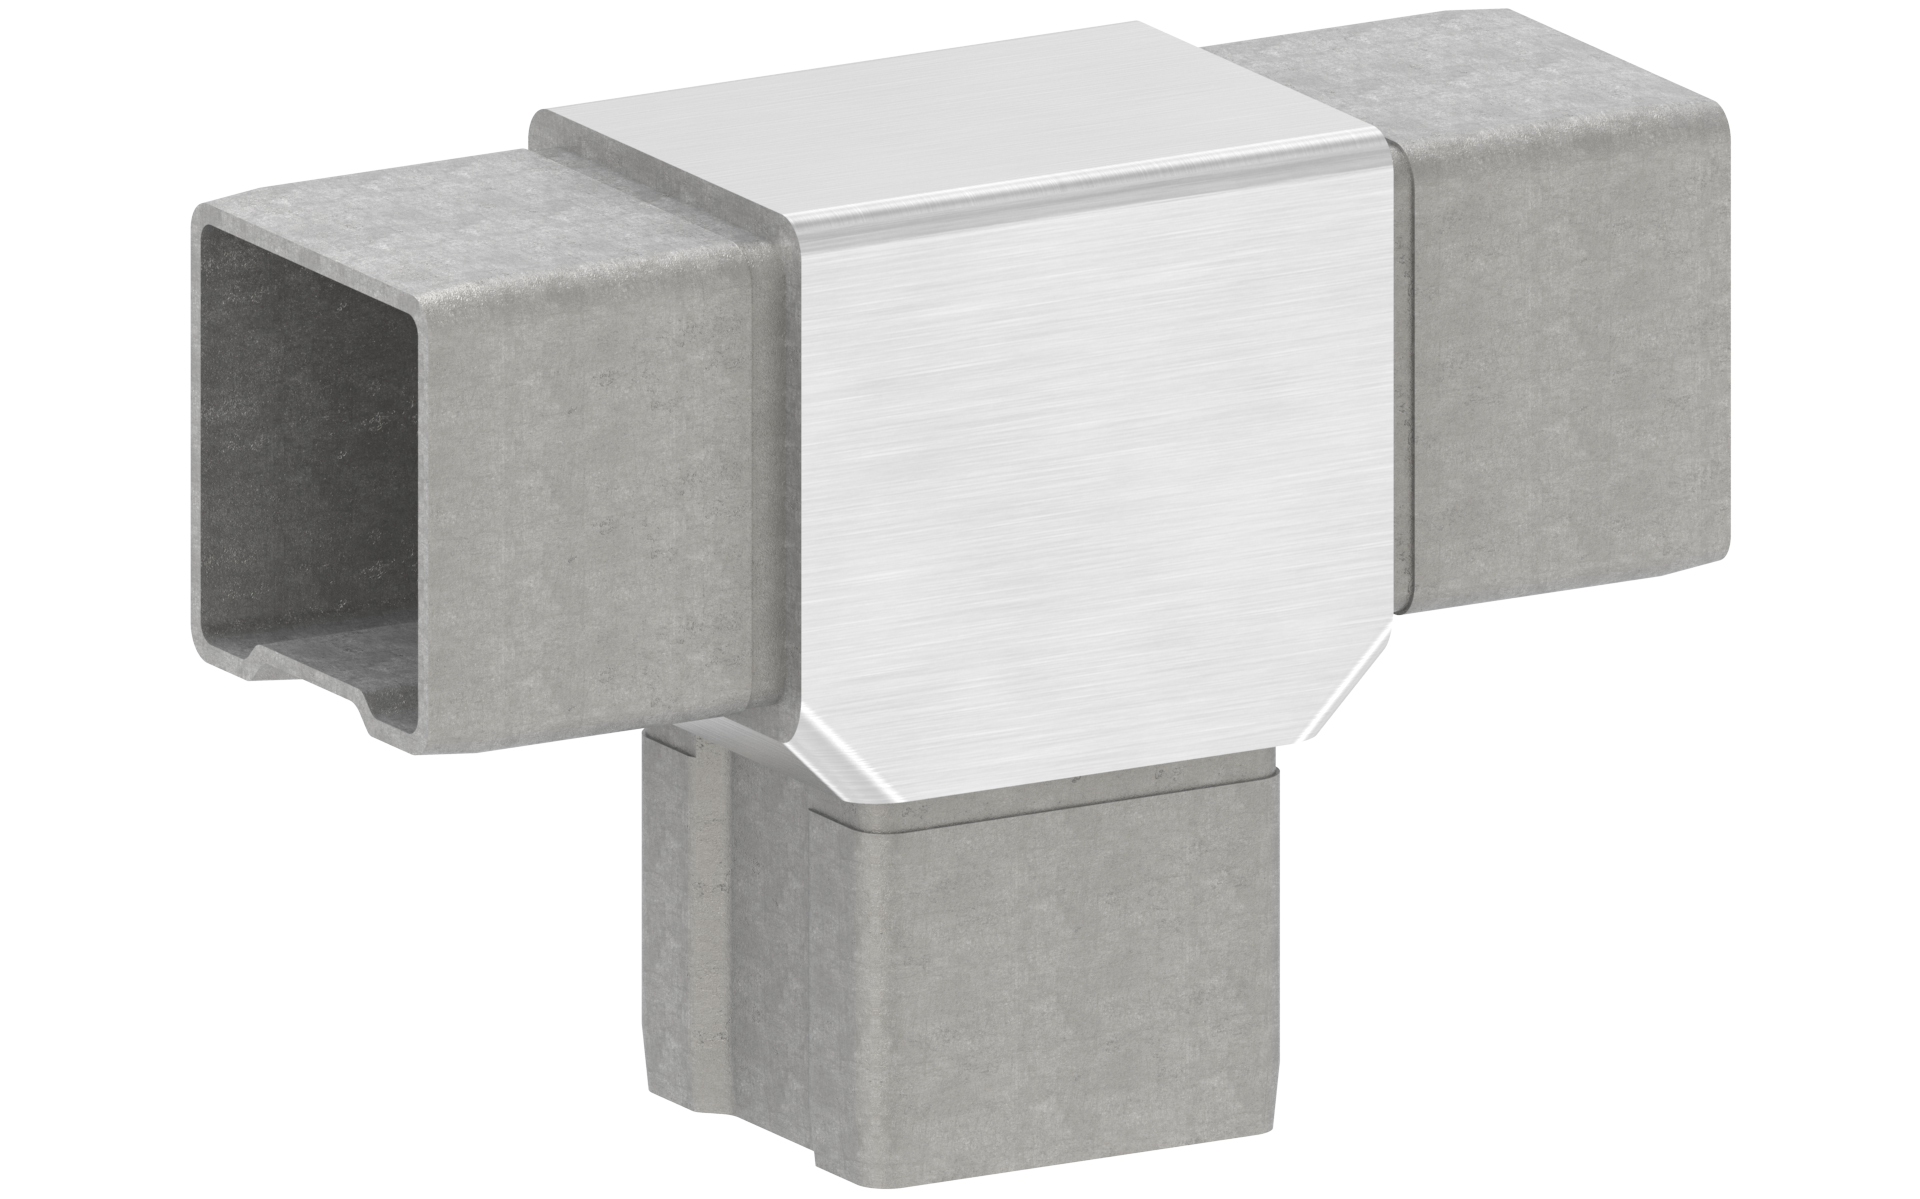 Pipe connector 'T' for square tube 40x40x2mm AISI 316 satin finish